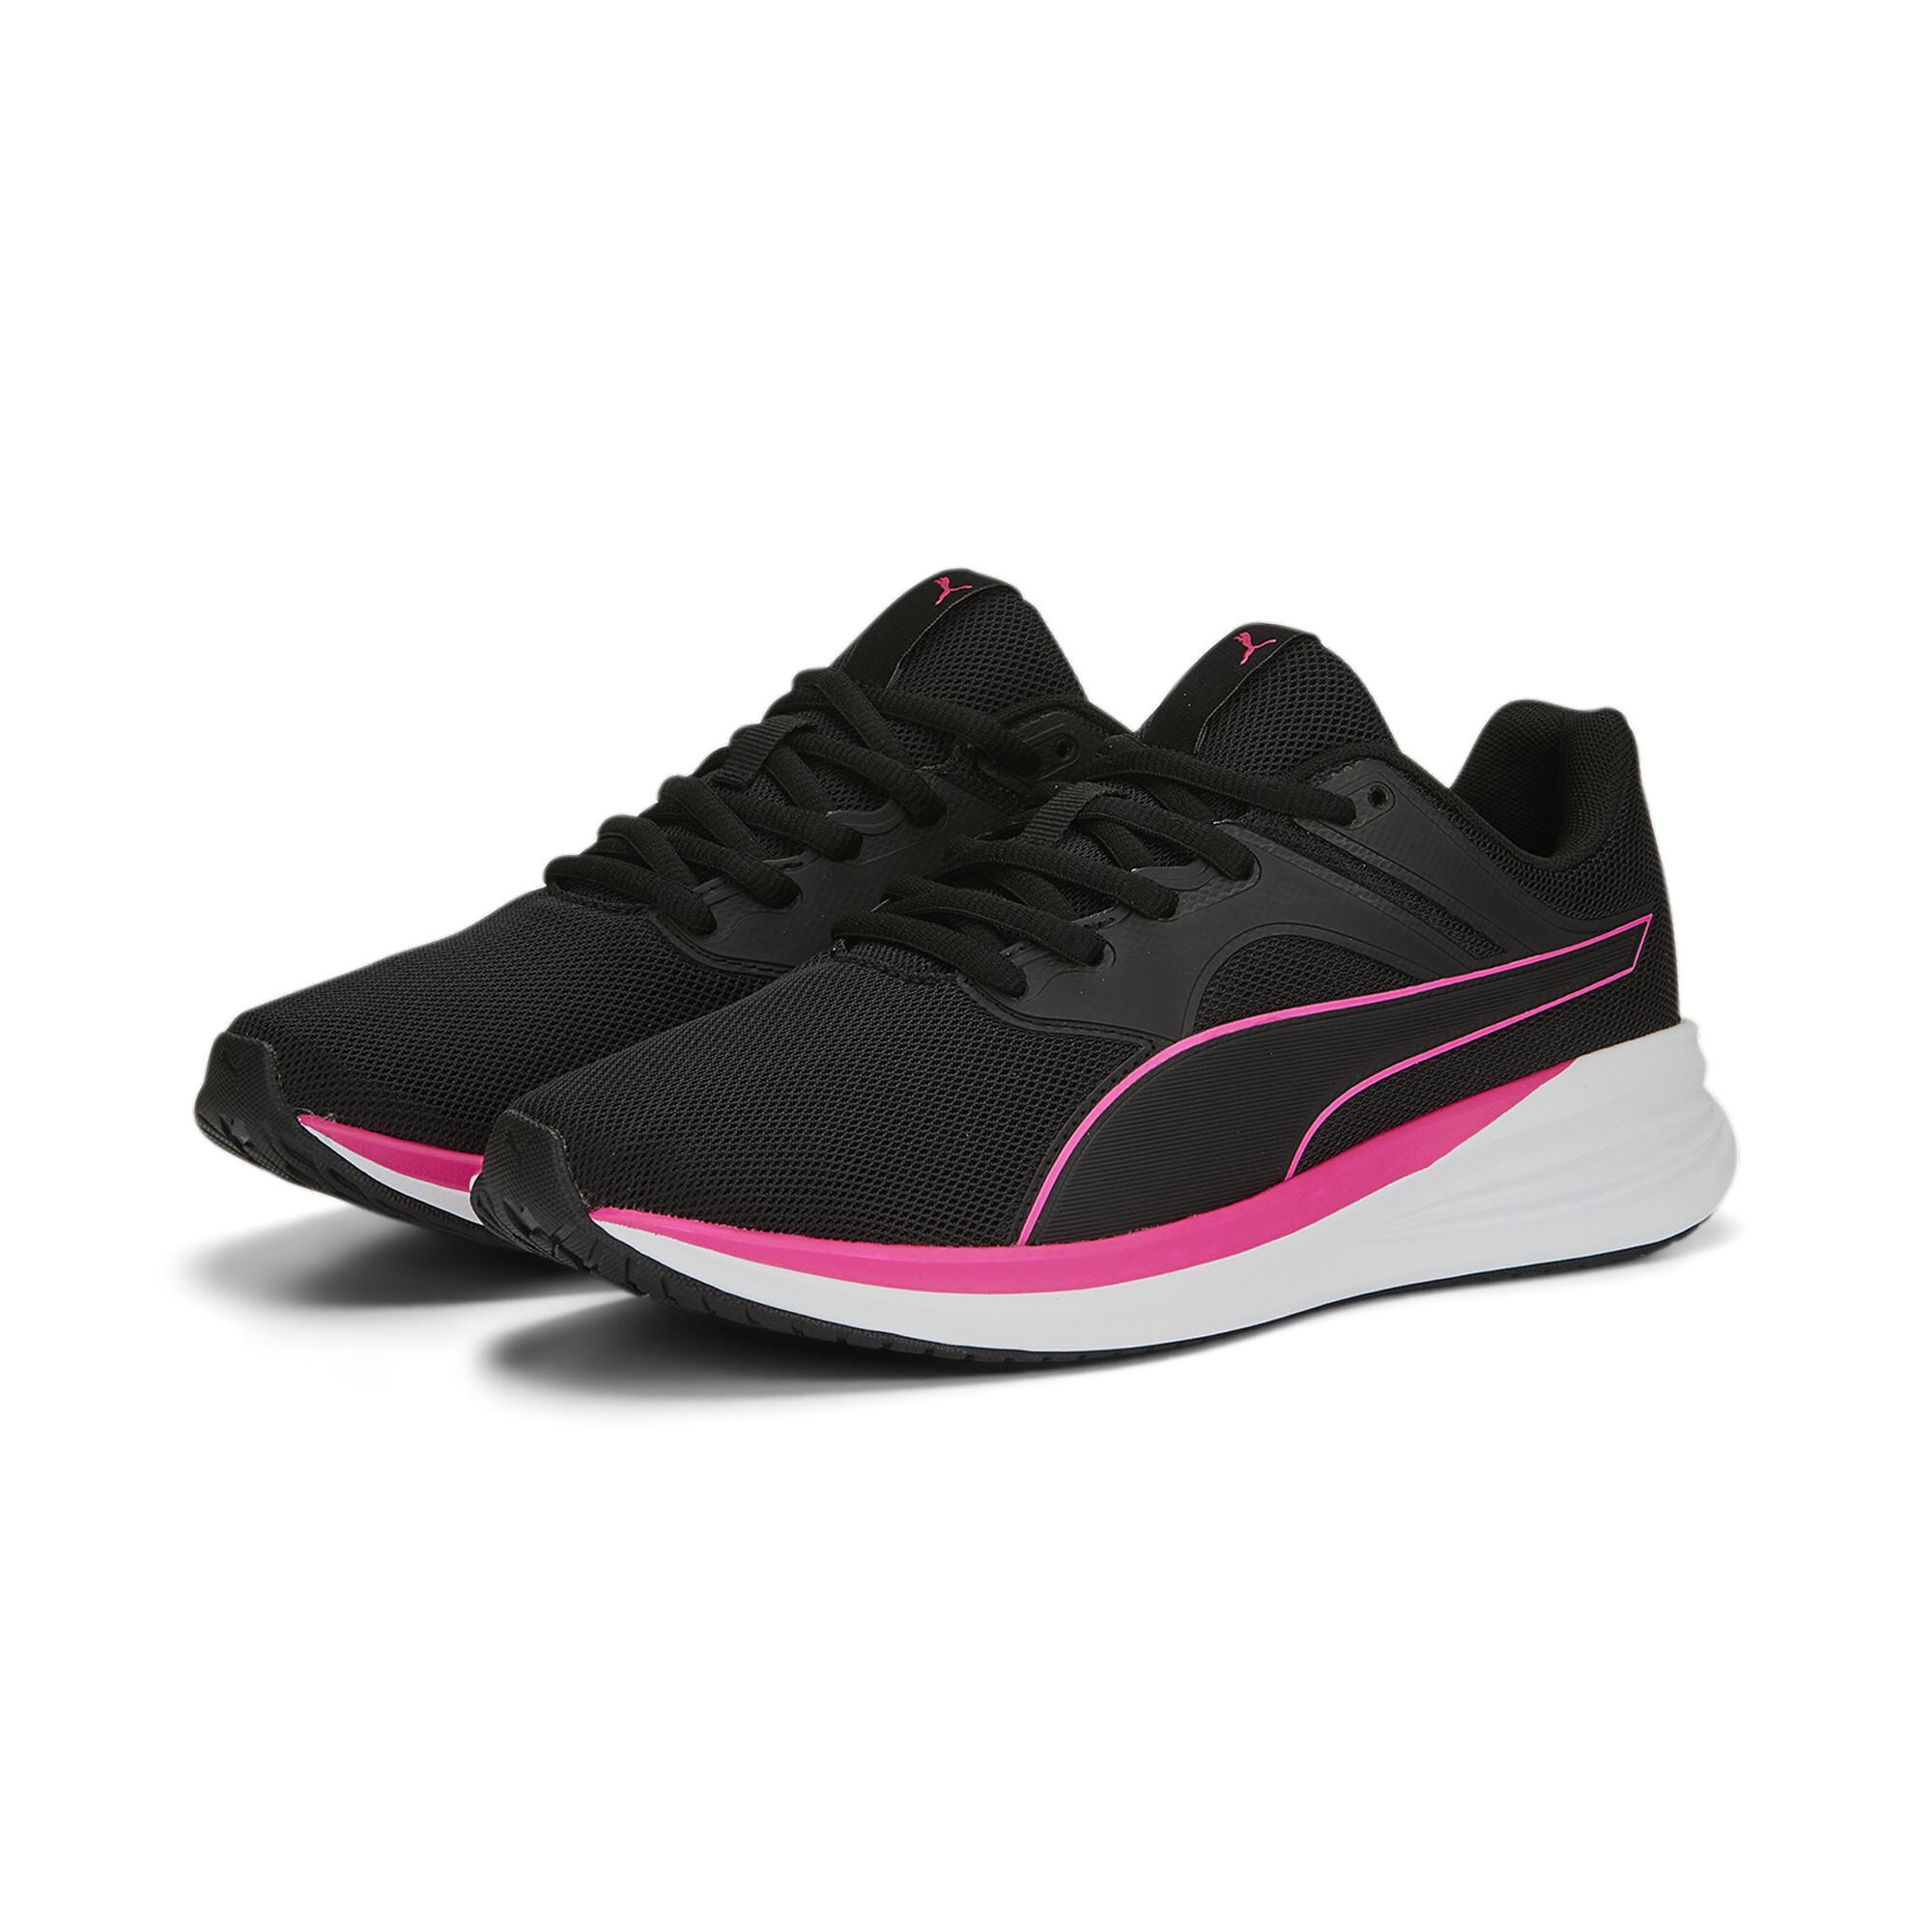 Puma Transport Running Shoes, Black, Size 42.5, Shoes